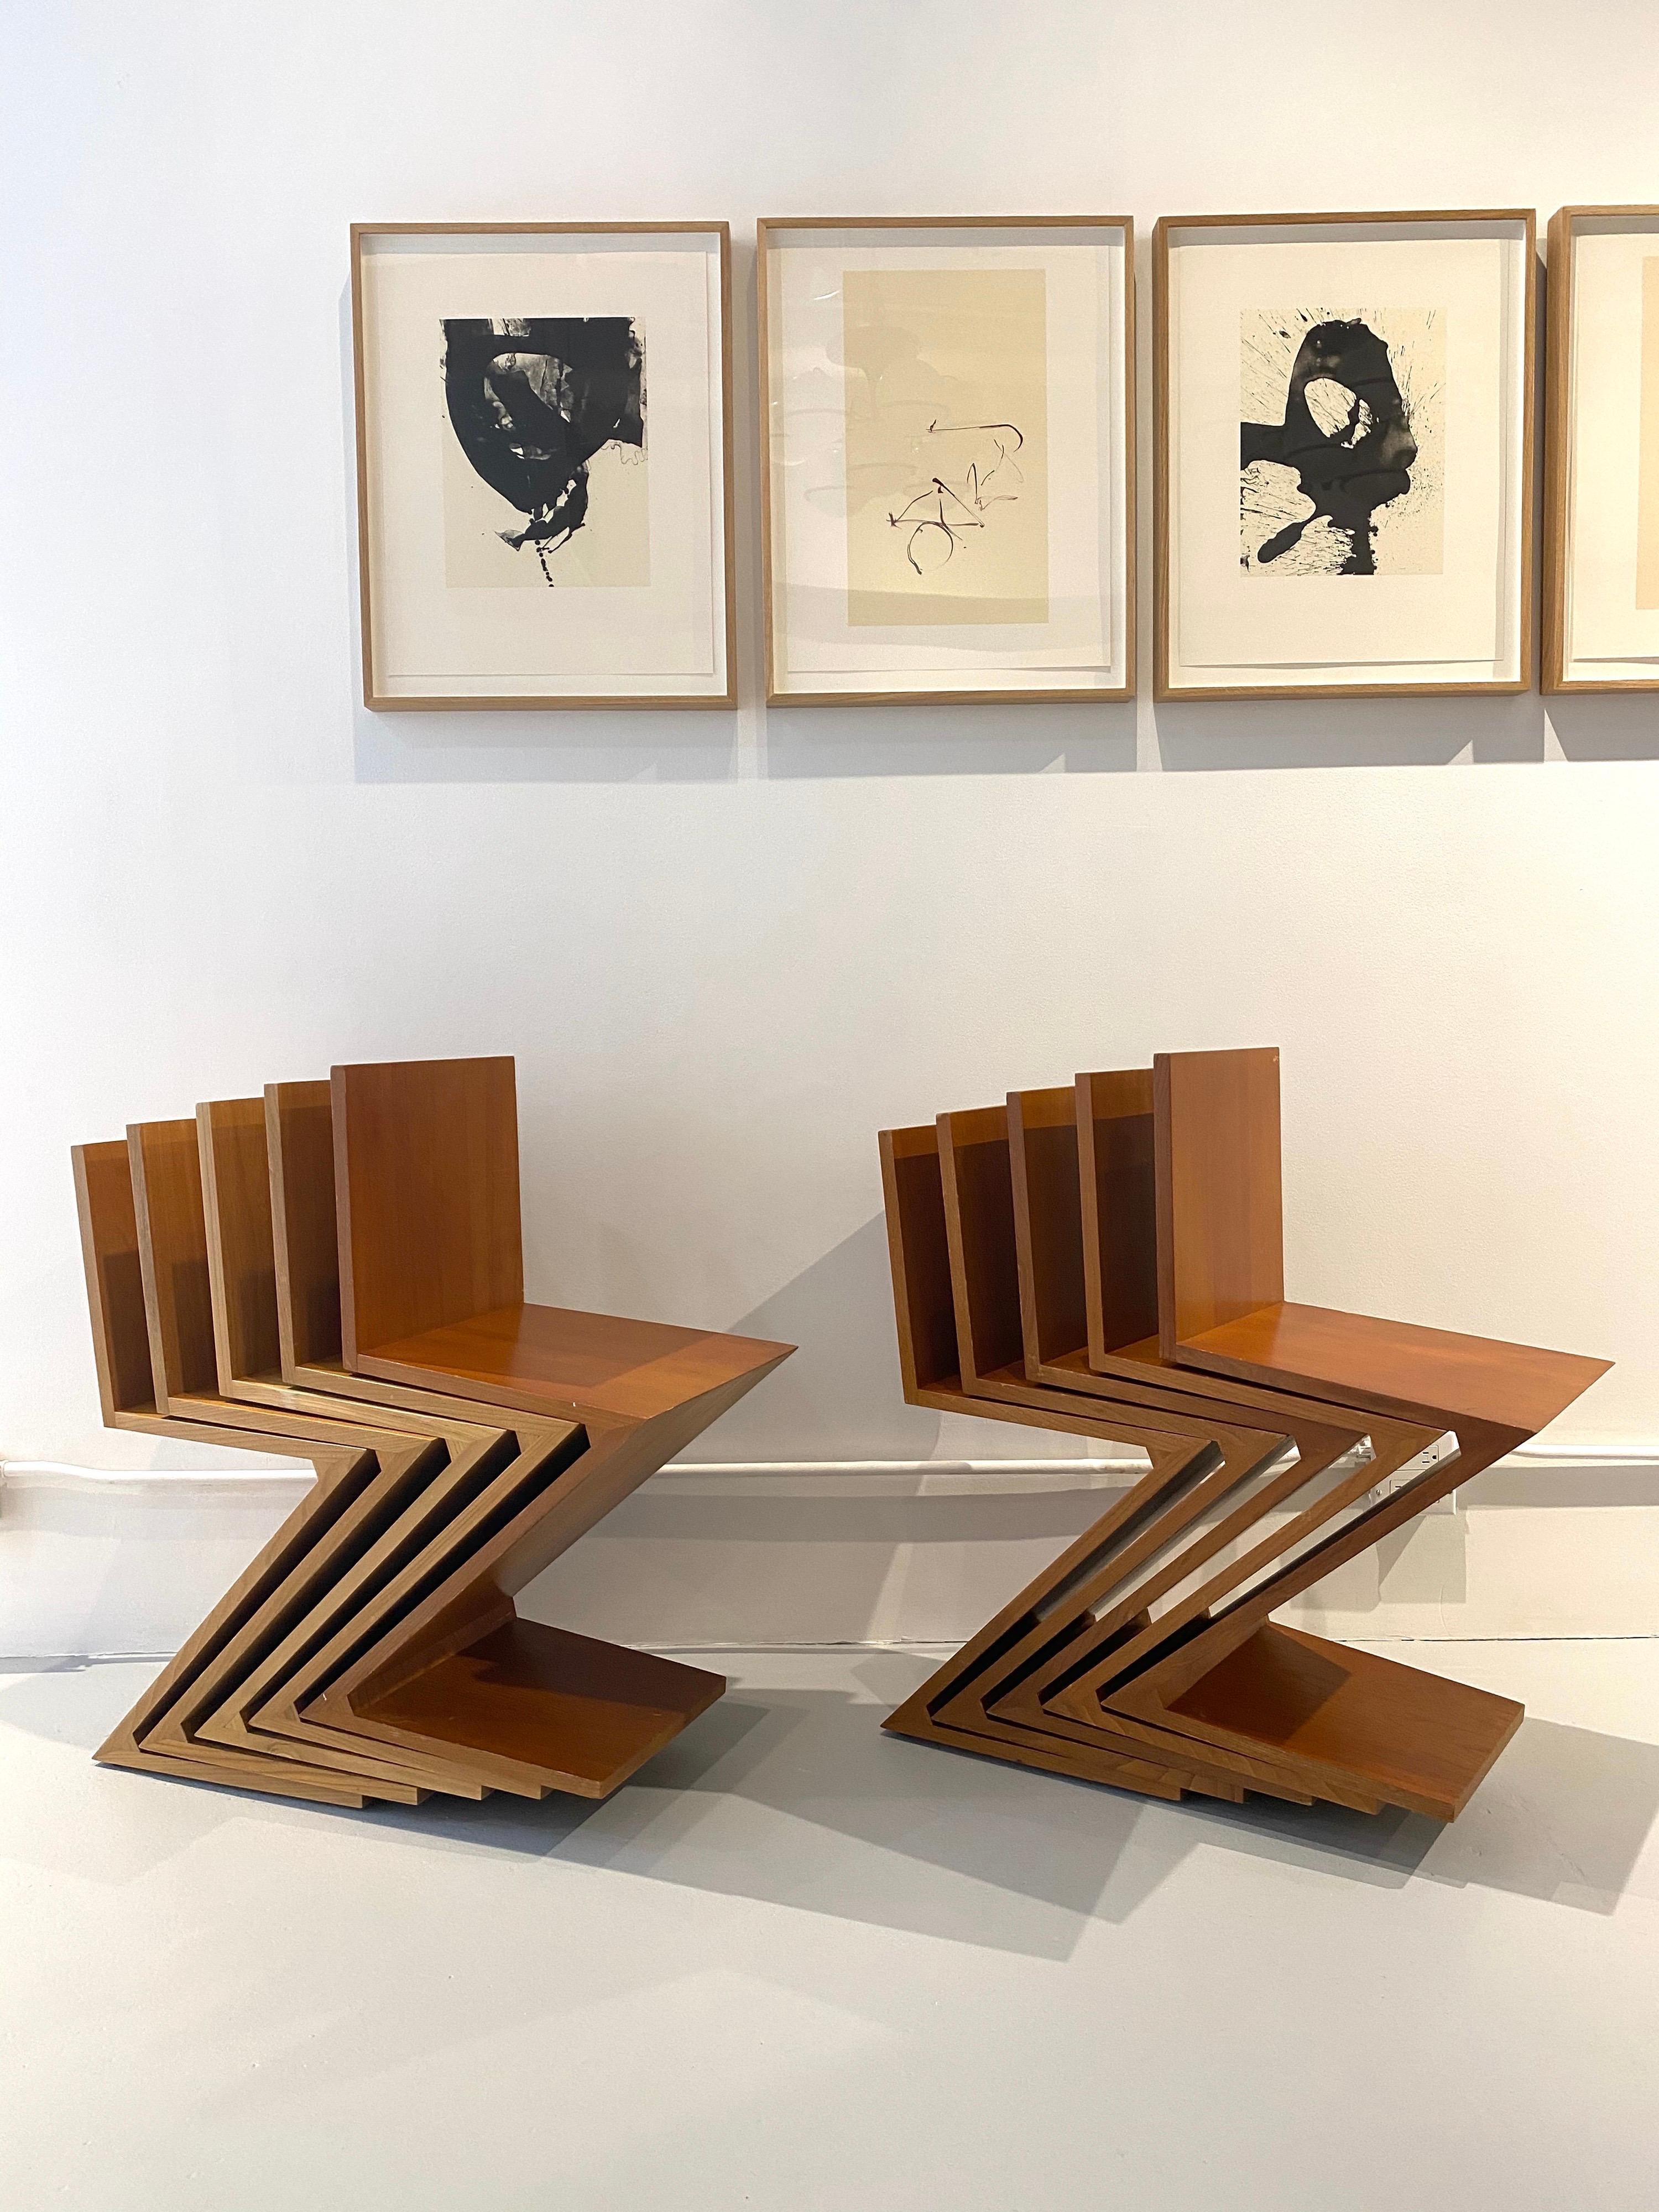 Set of ten first edition for Cassina, 1973 Gerrit Rietveld Zig Zag chairs.
The chairs are in completely original condition, sturdy and solid. Each one is marked with an early Cassina stamp.
Six of the chairs are in a medium stain and four are